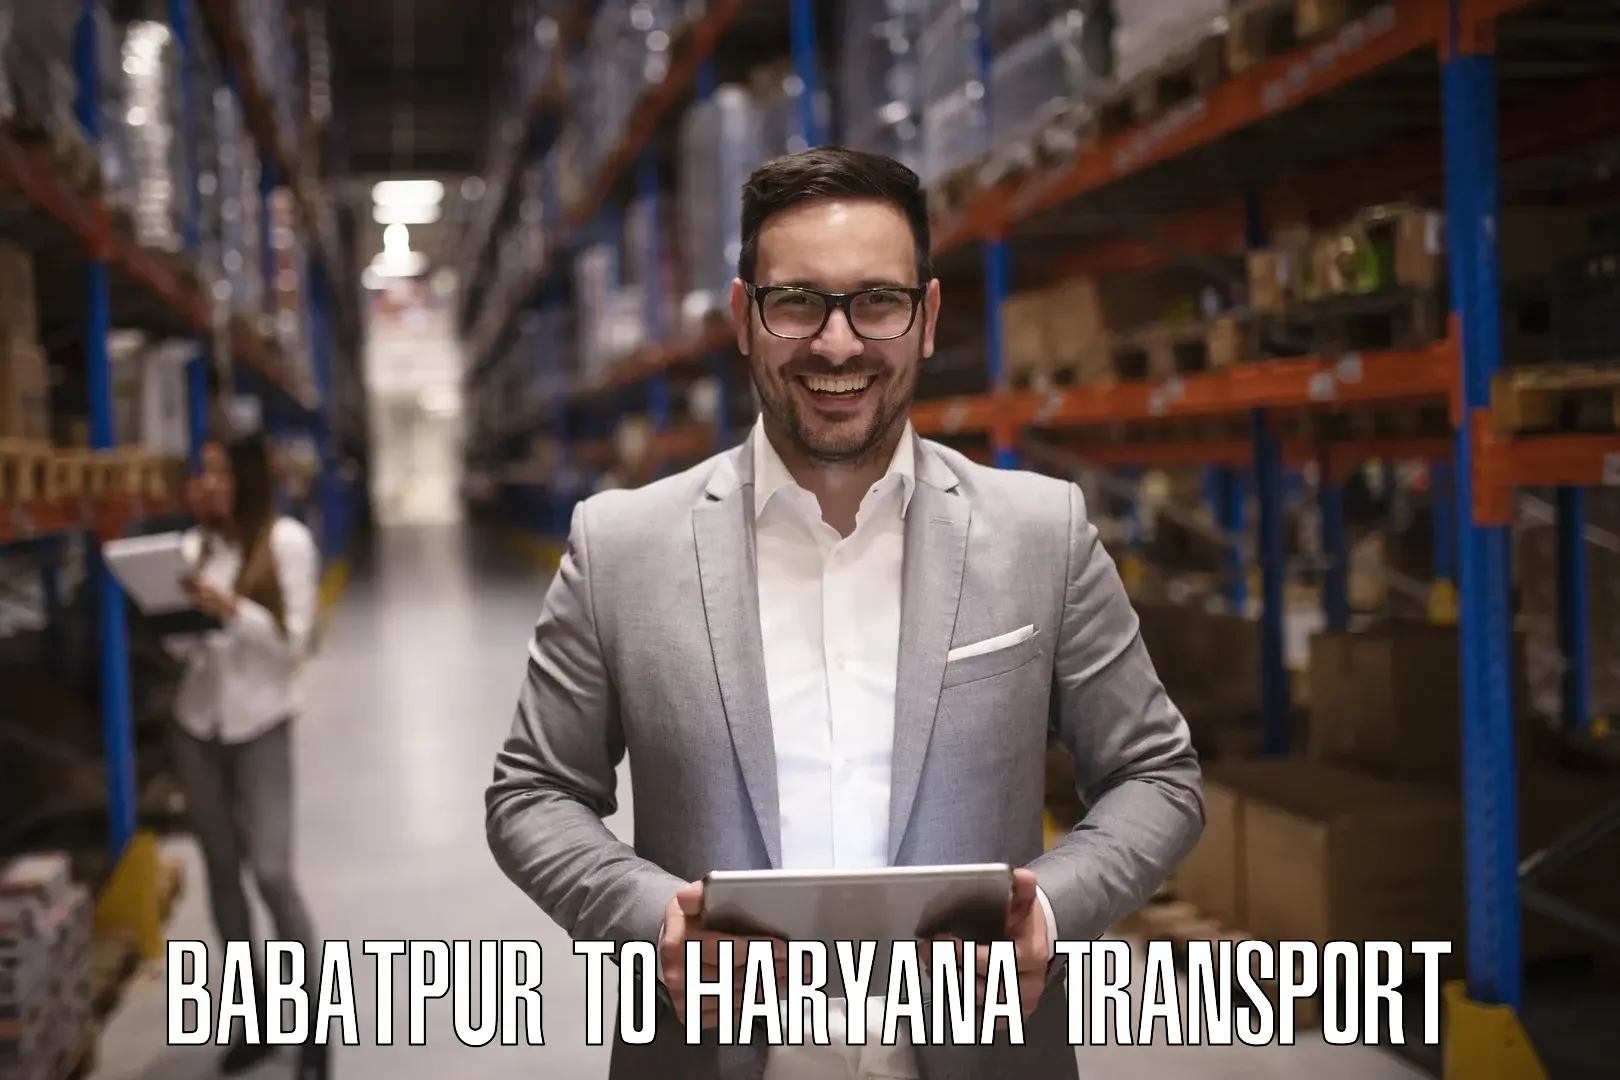 Goods delivery service Babatpur to Gurugram